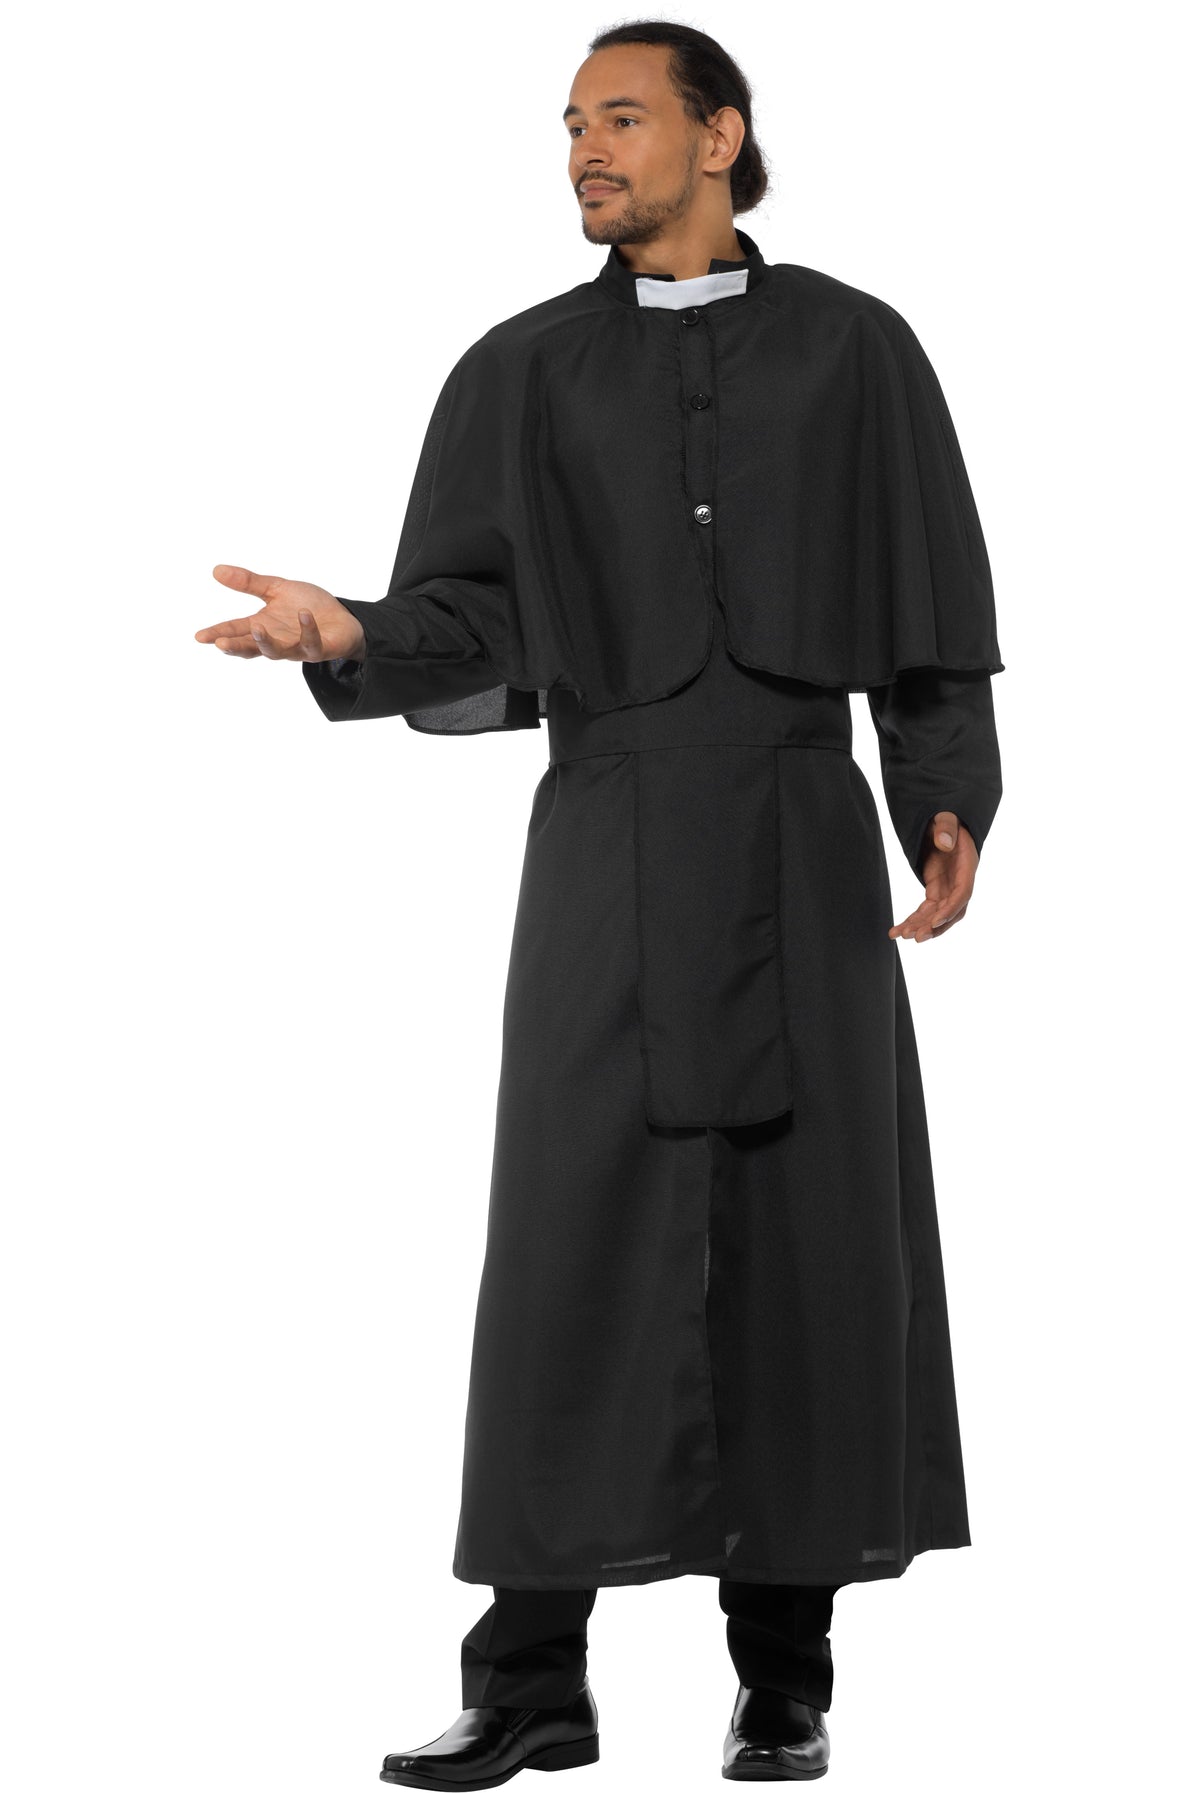 Deluxe Witch Hunter Priest Adult Costume